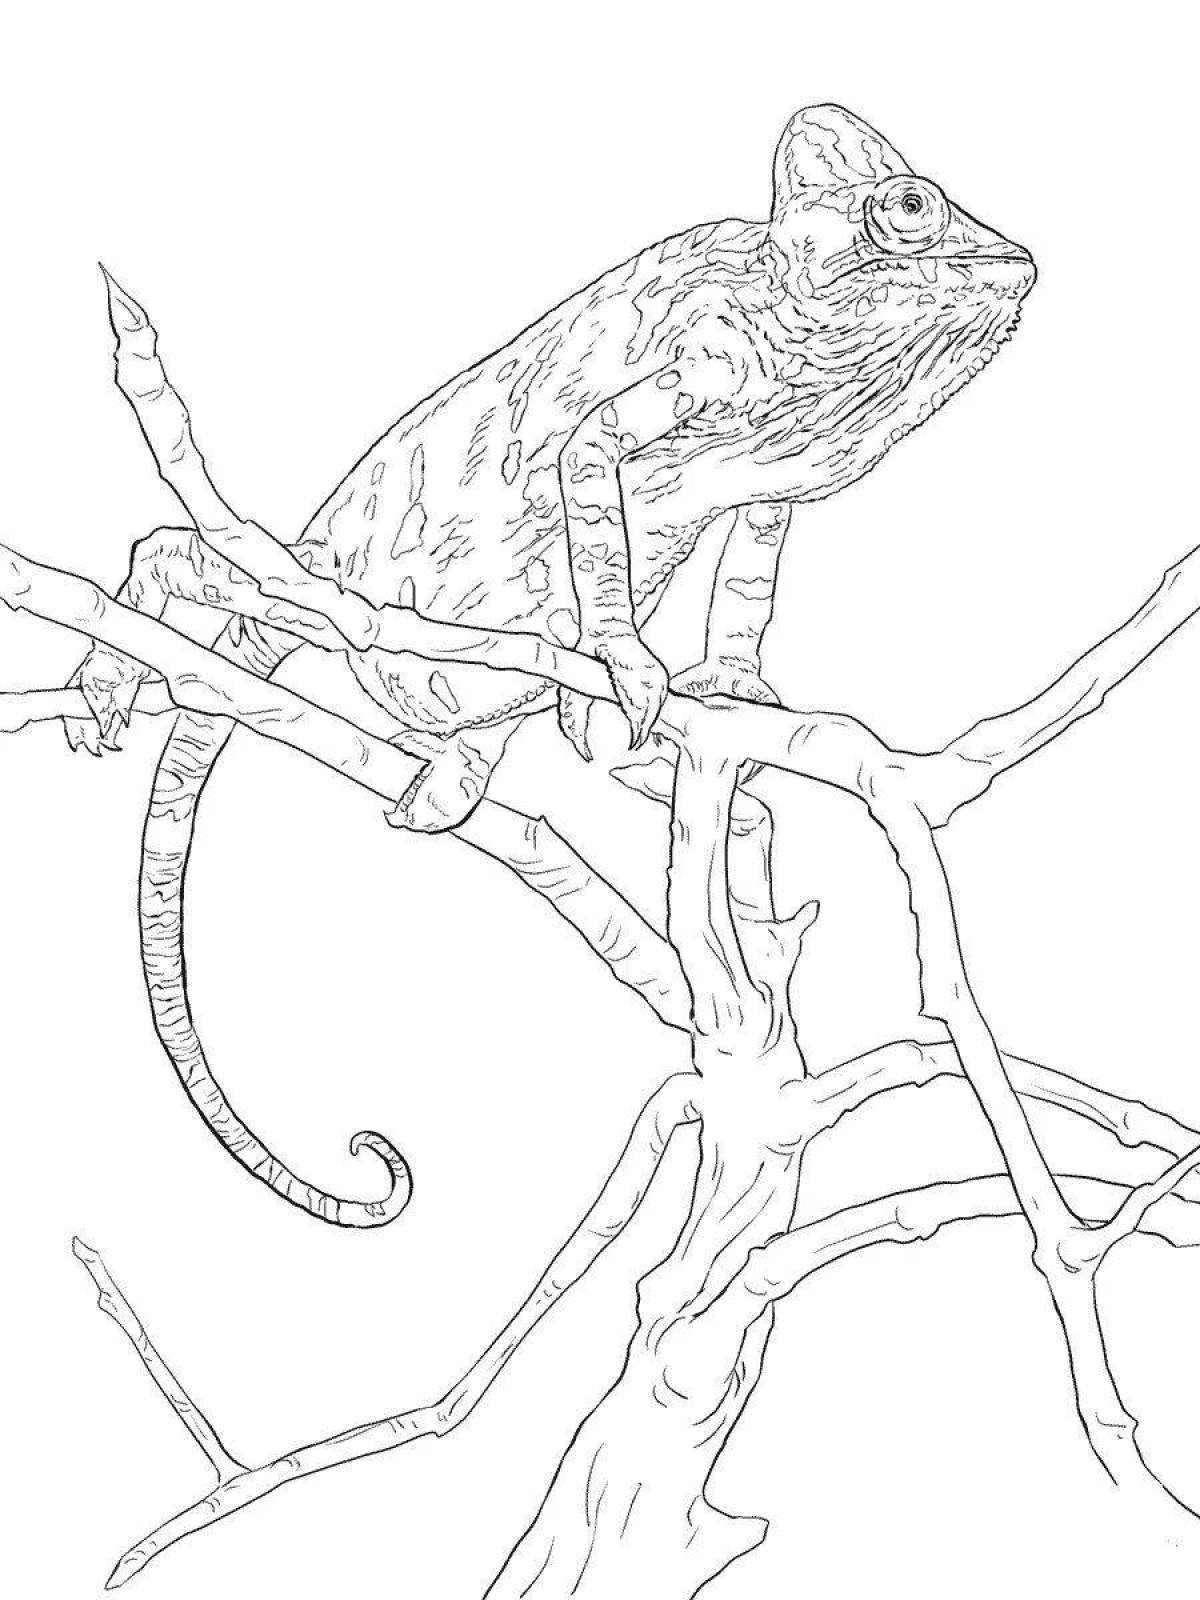 Mysterious chameleon coloring page